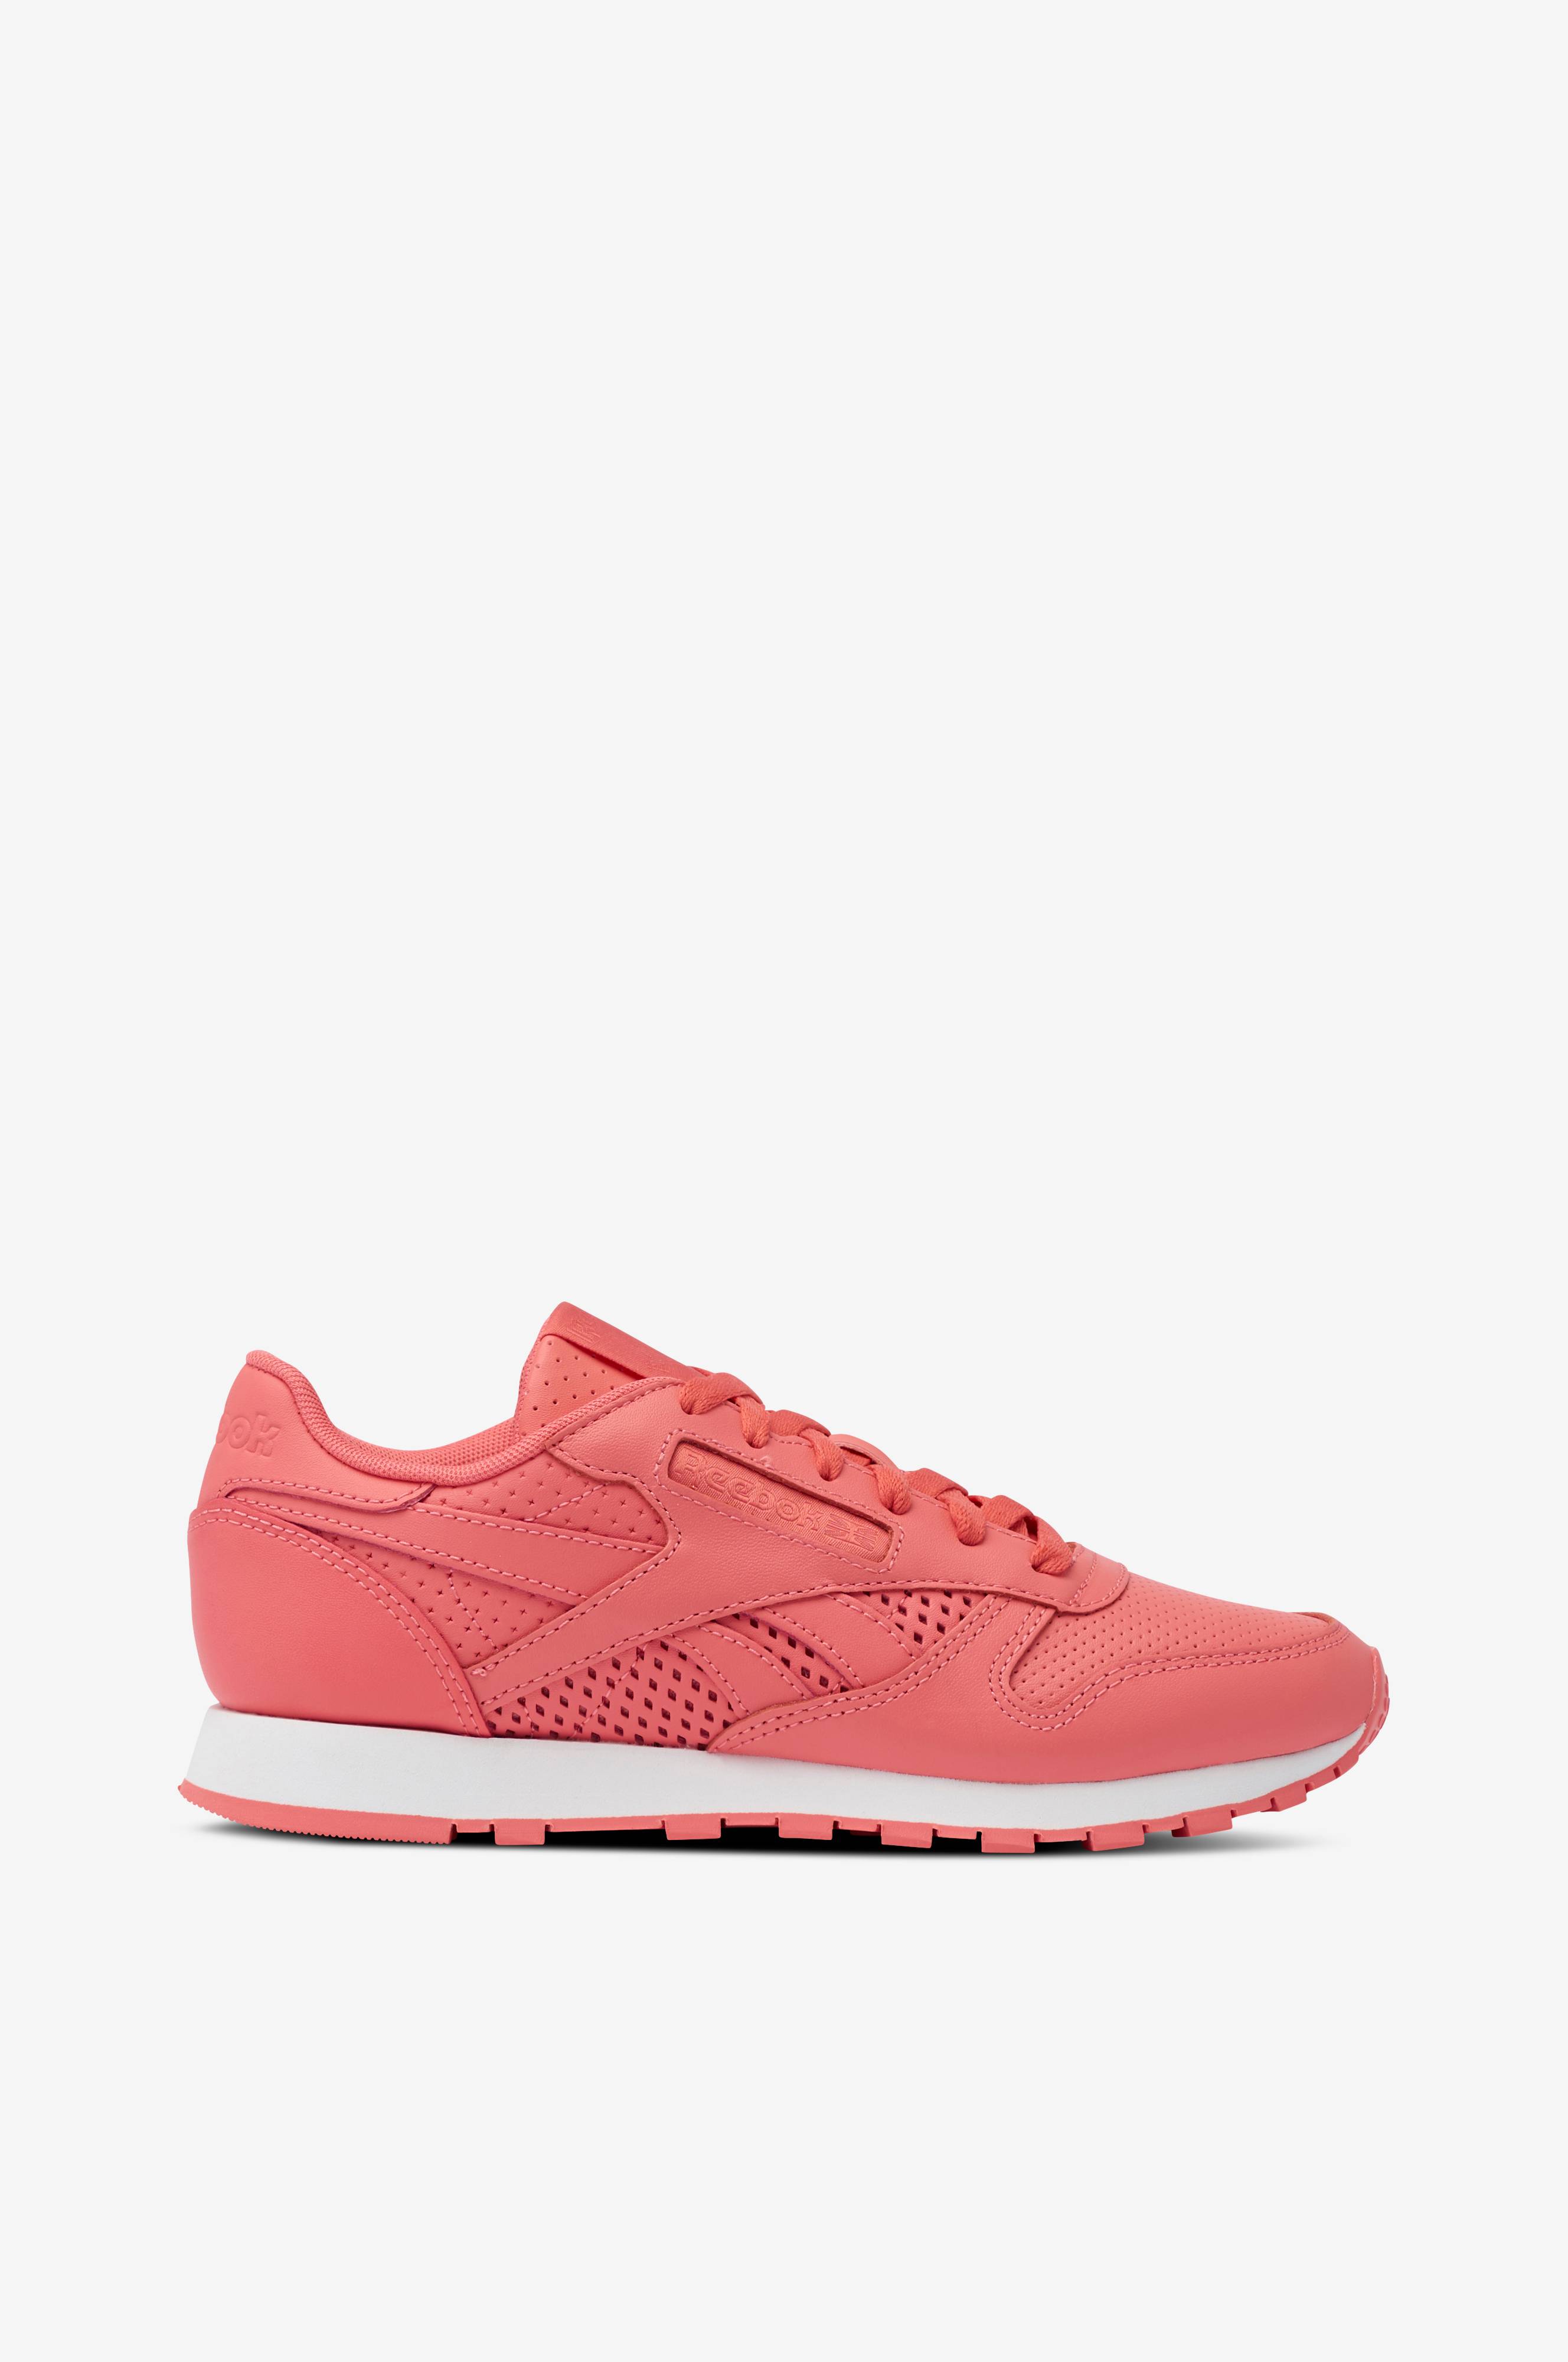 Advarsel Tilgivende Hammer Reebok Classic Sneakers Classic Leather - Rosa - Lave sneakers | Ellos.dk